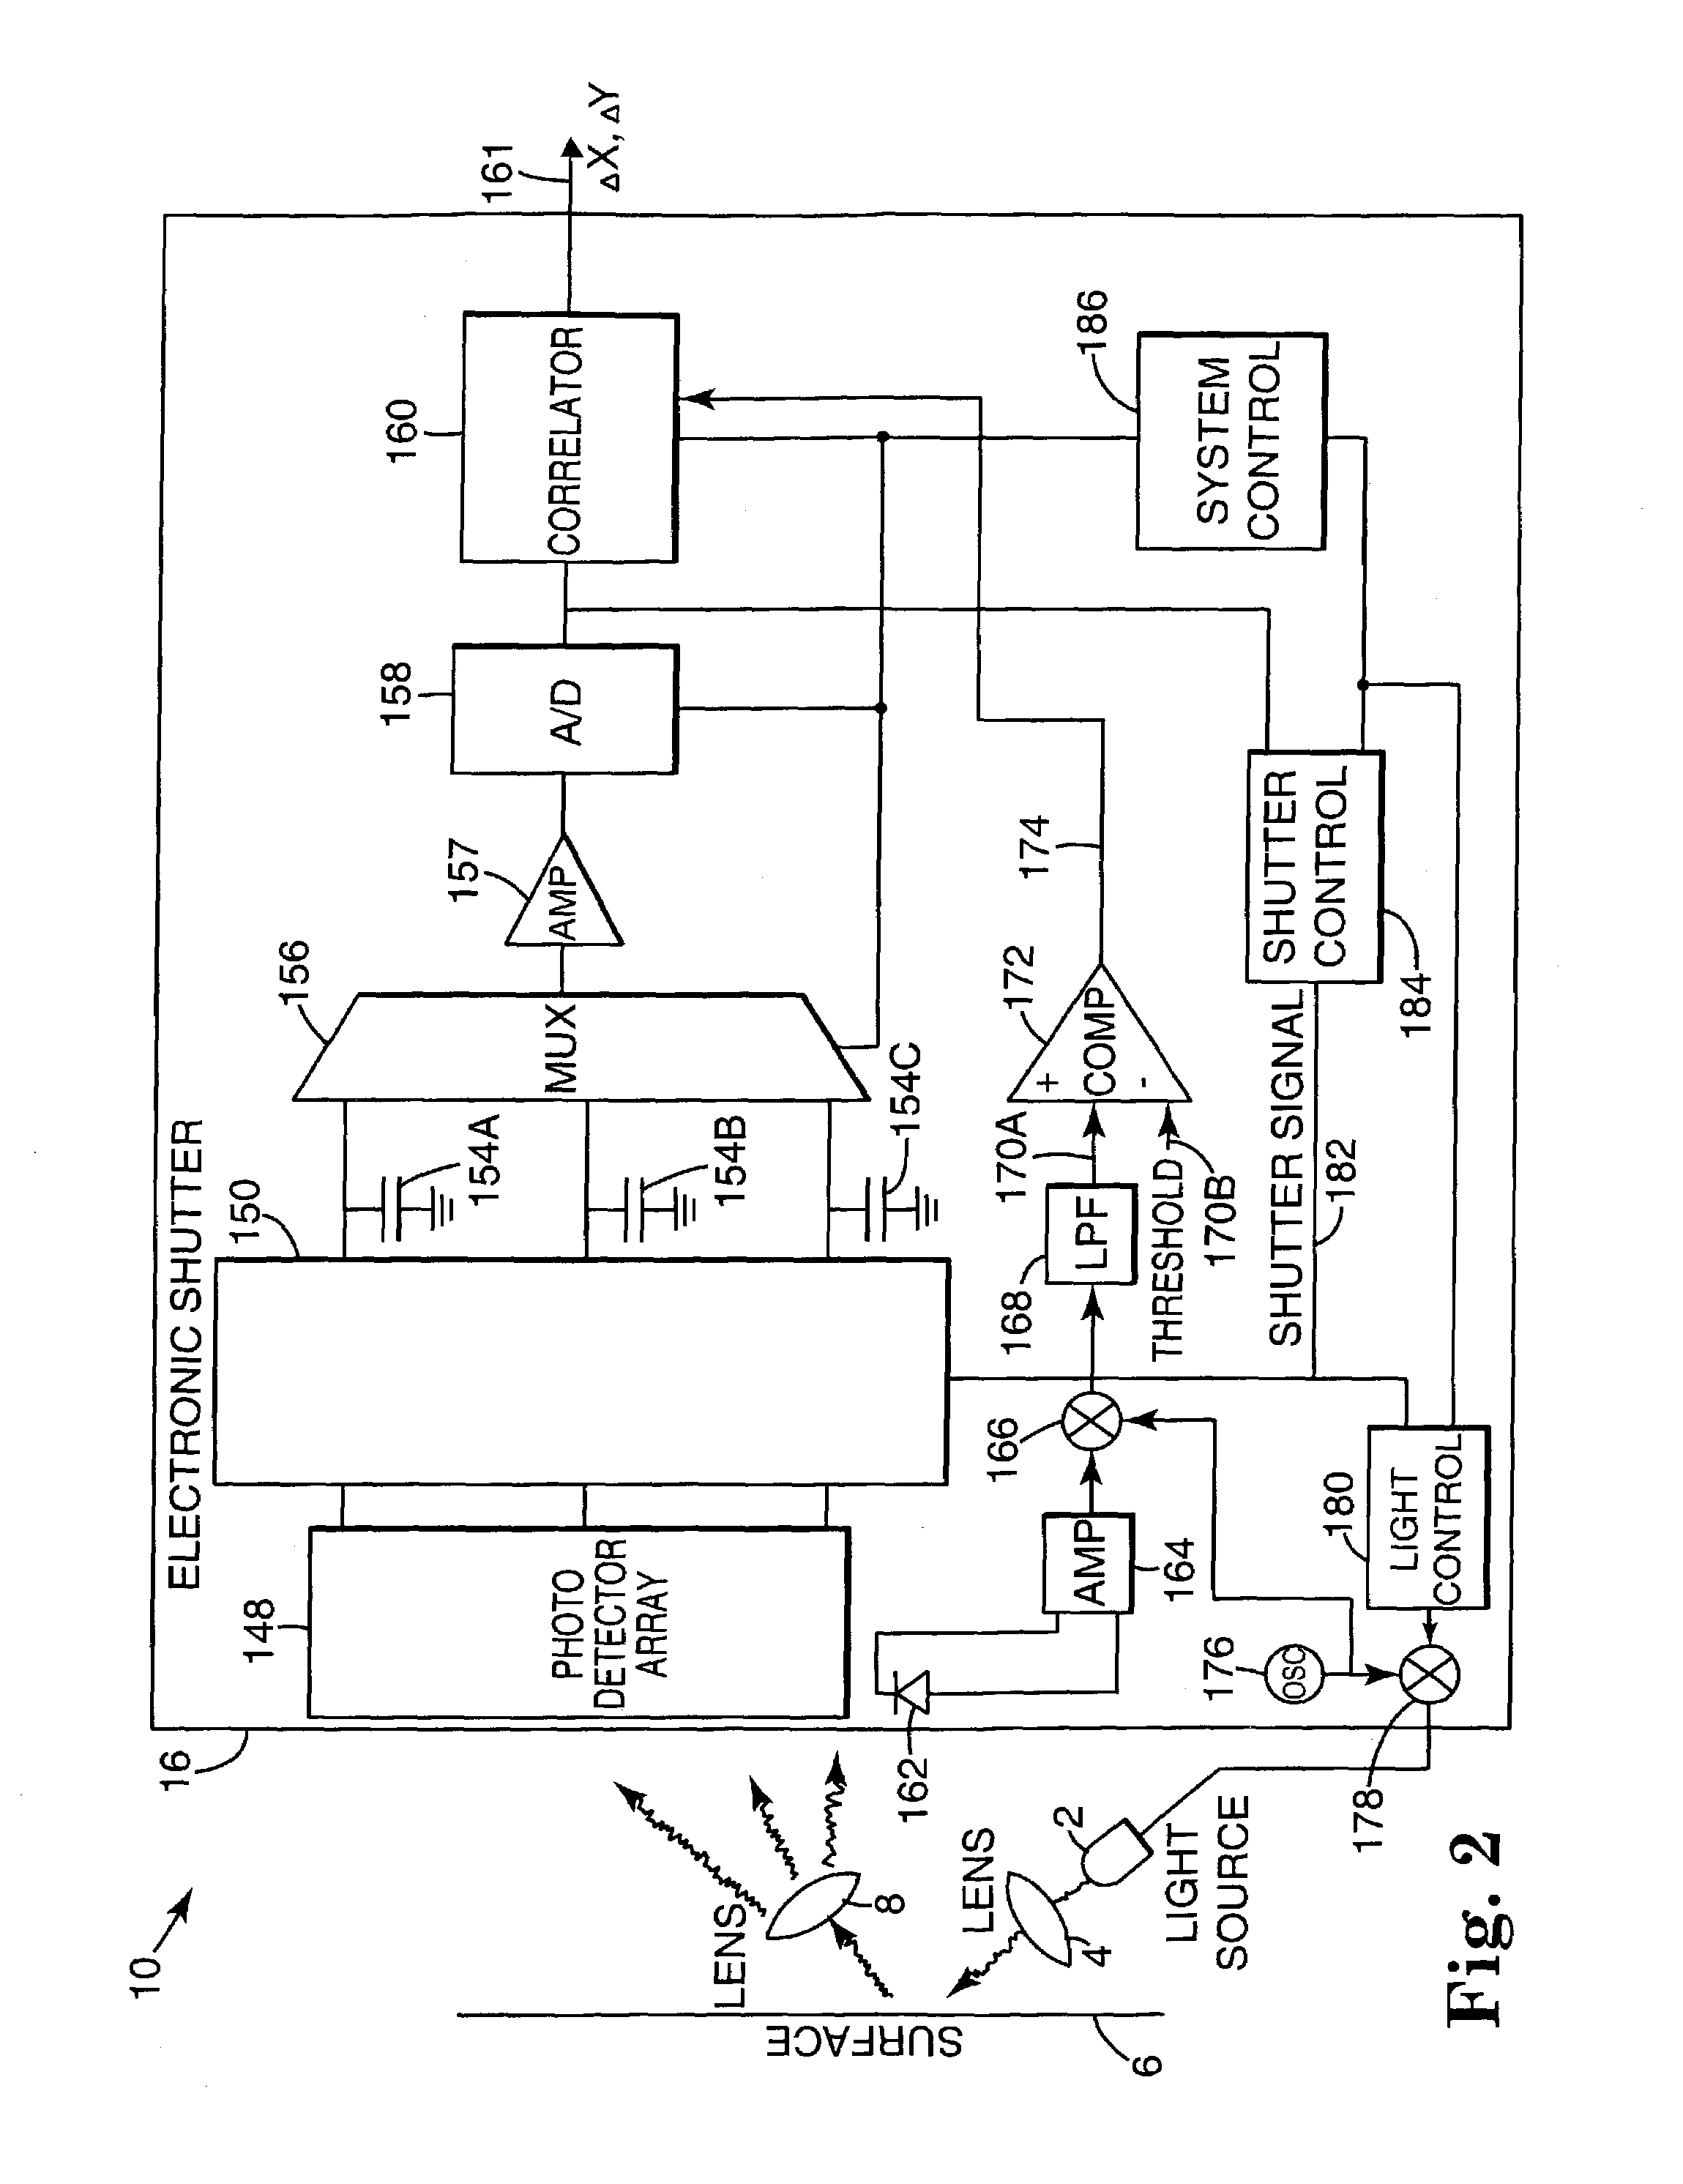 Apparatus for controlling a screen pointer that distinguishes between ambient light and light from its light source